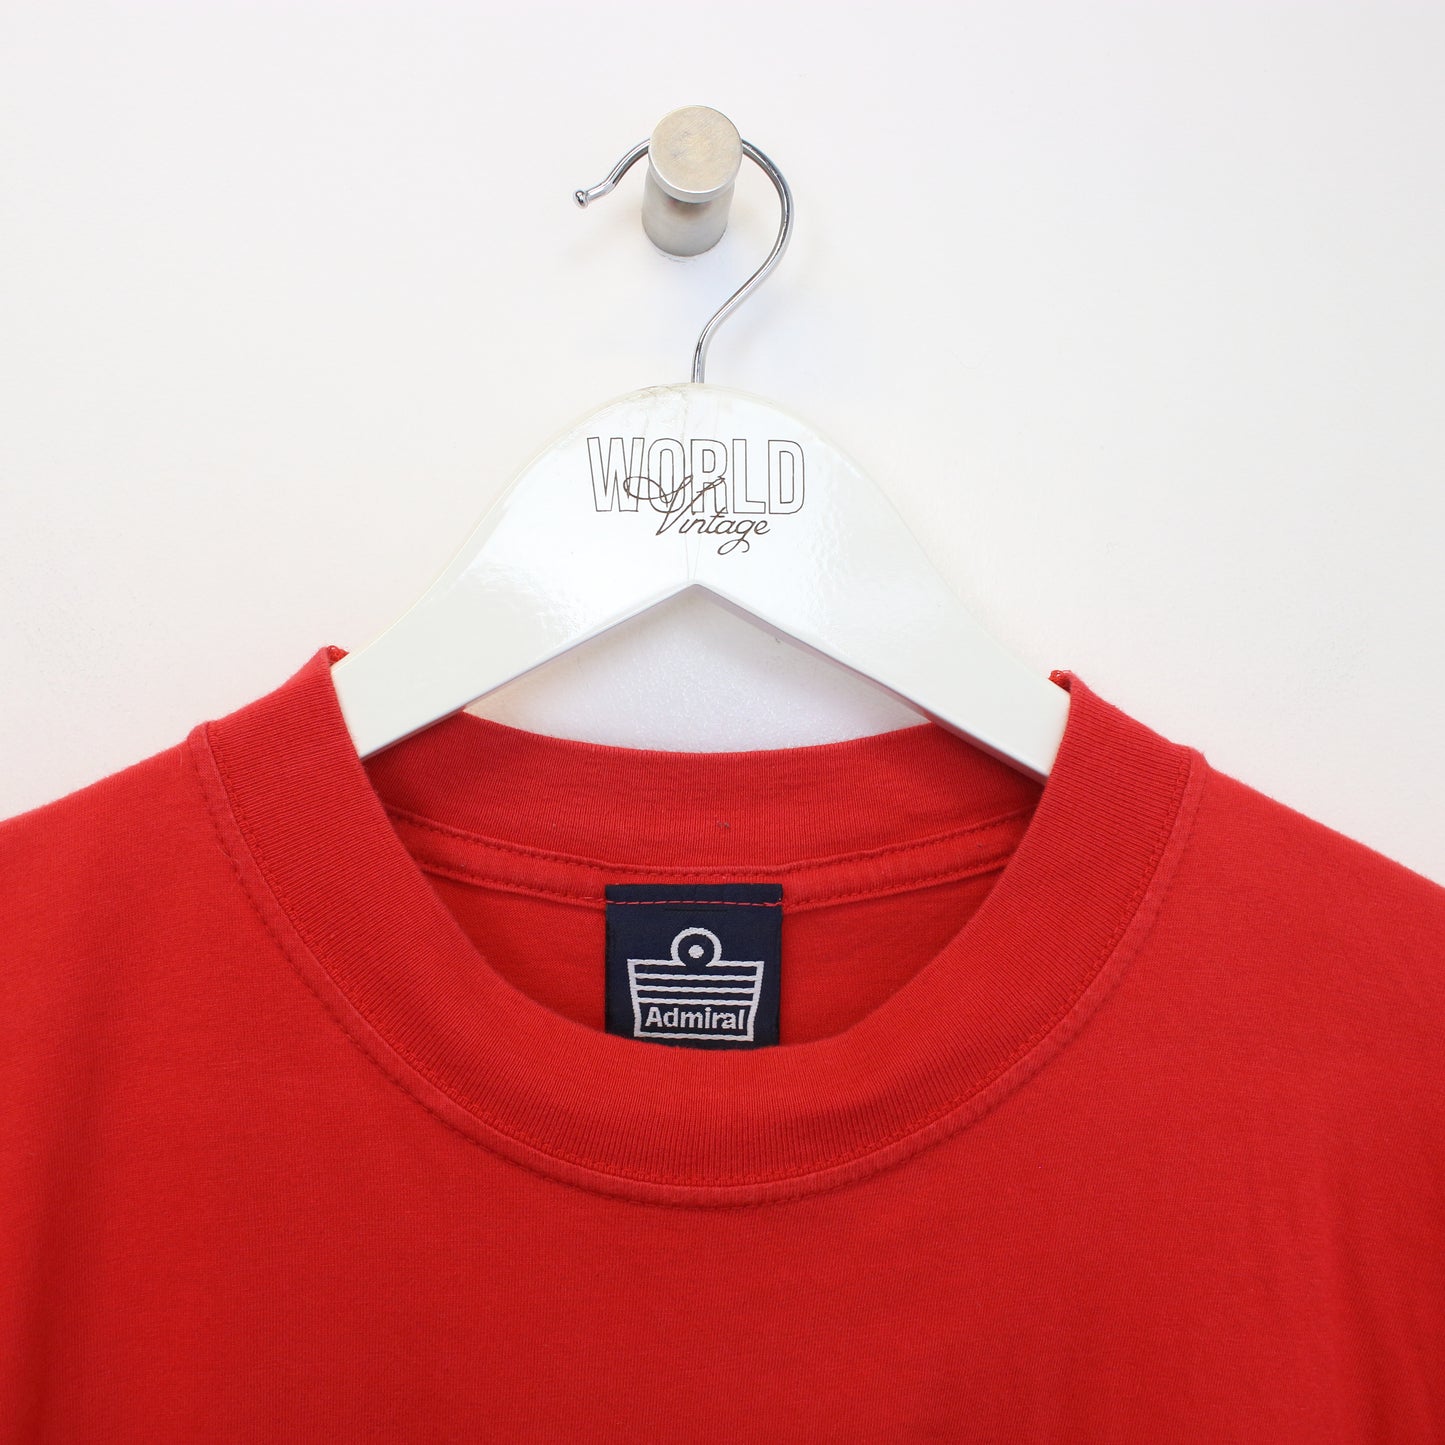 Vintage Admiral England t-shirt in red. Best fits L